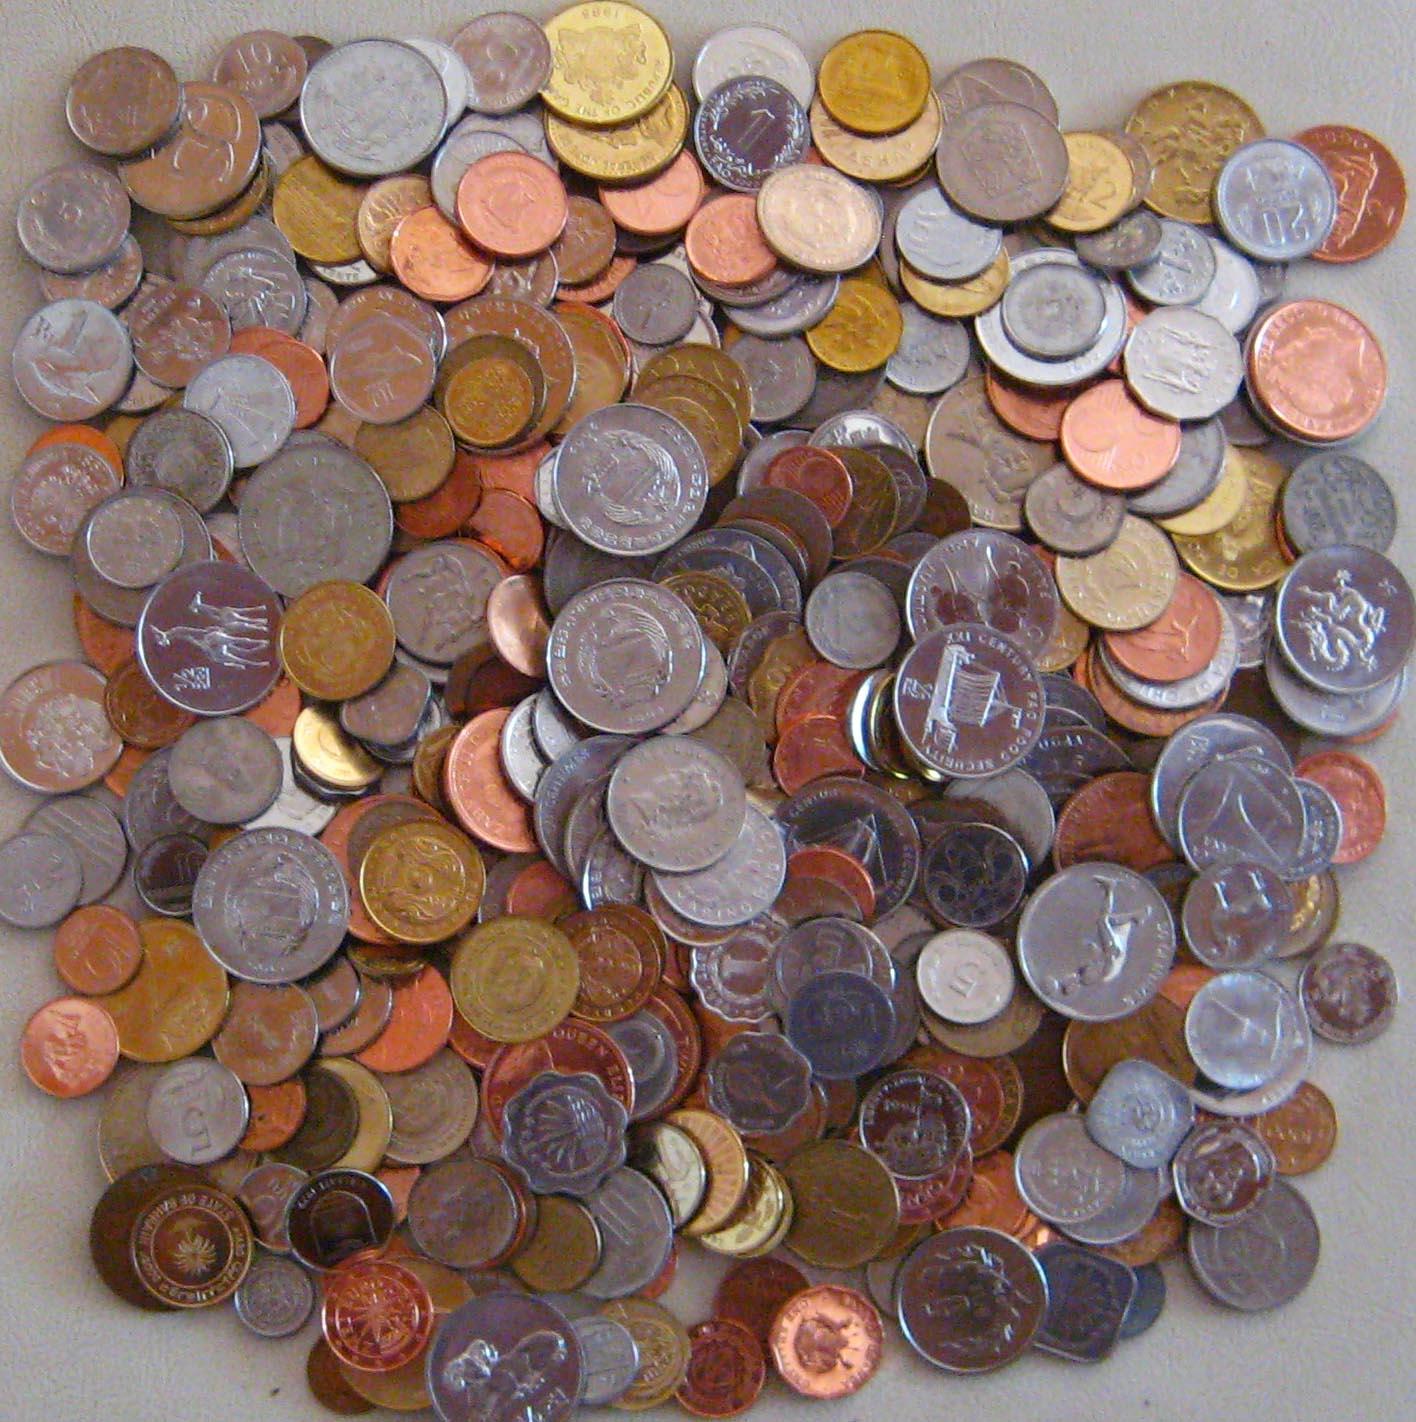 HUGE 12 POUND  Lb BAG WORLD COINS FOREIGN COIN LOT 